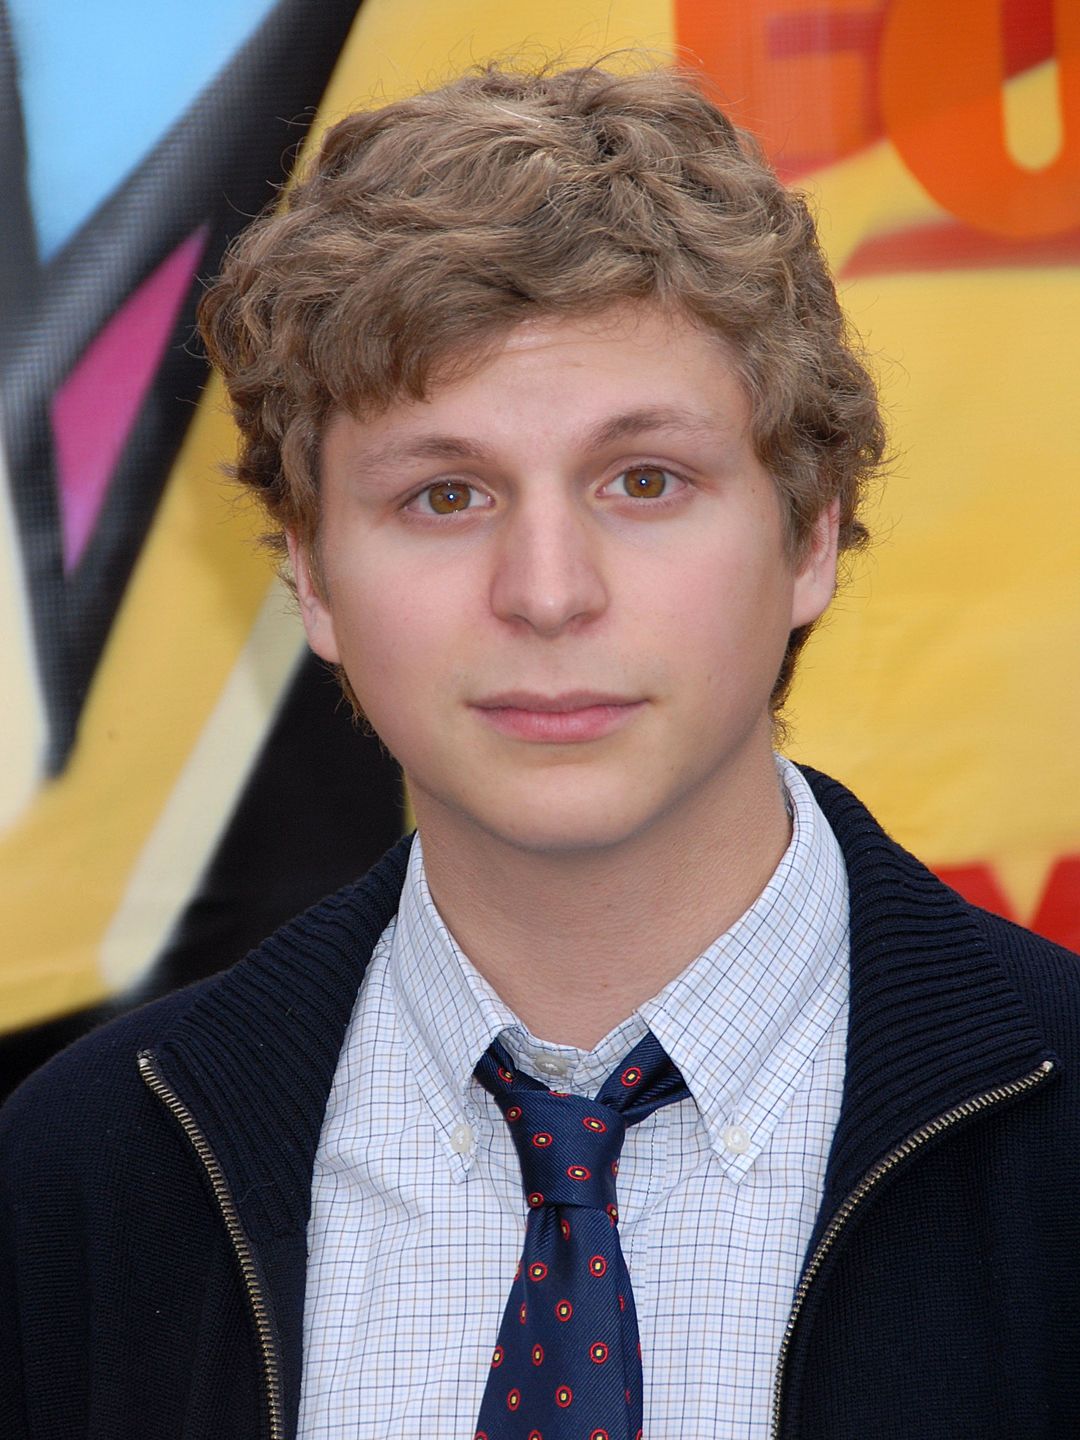 Michael Cera who is his mother